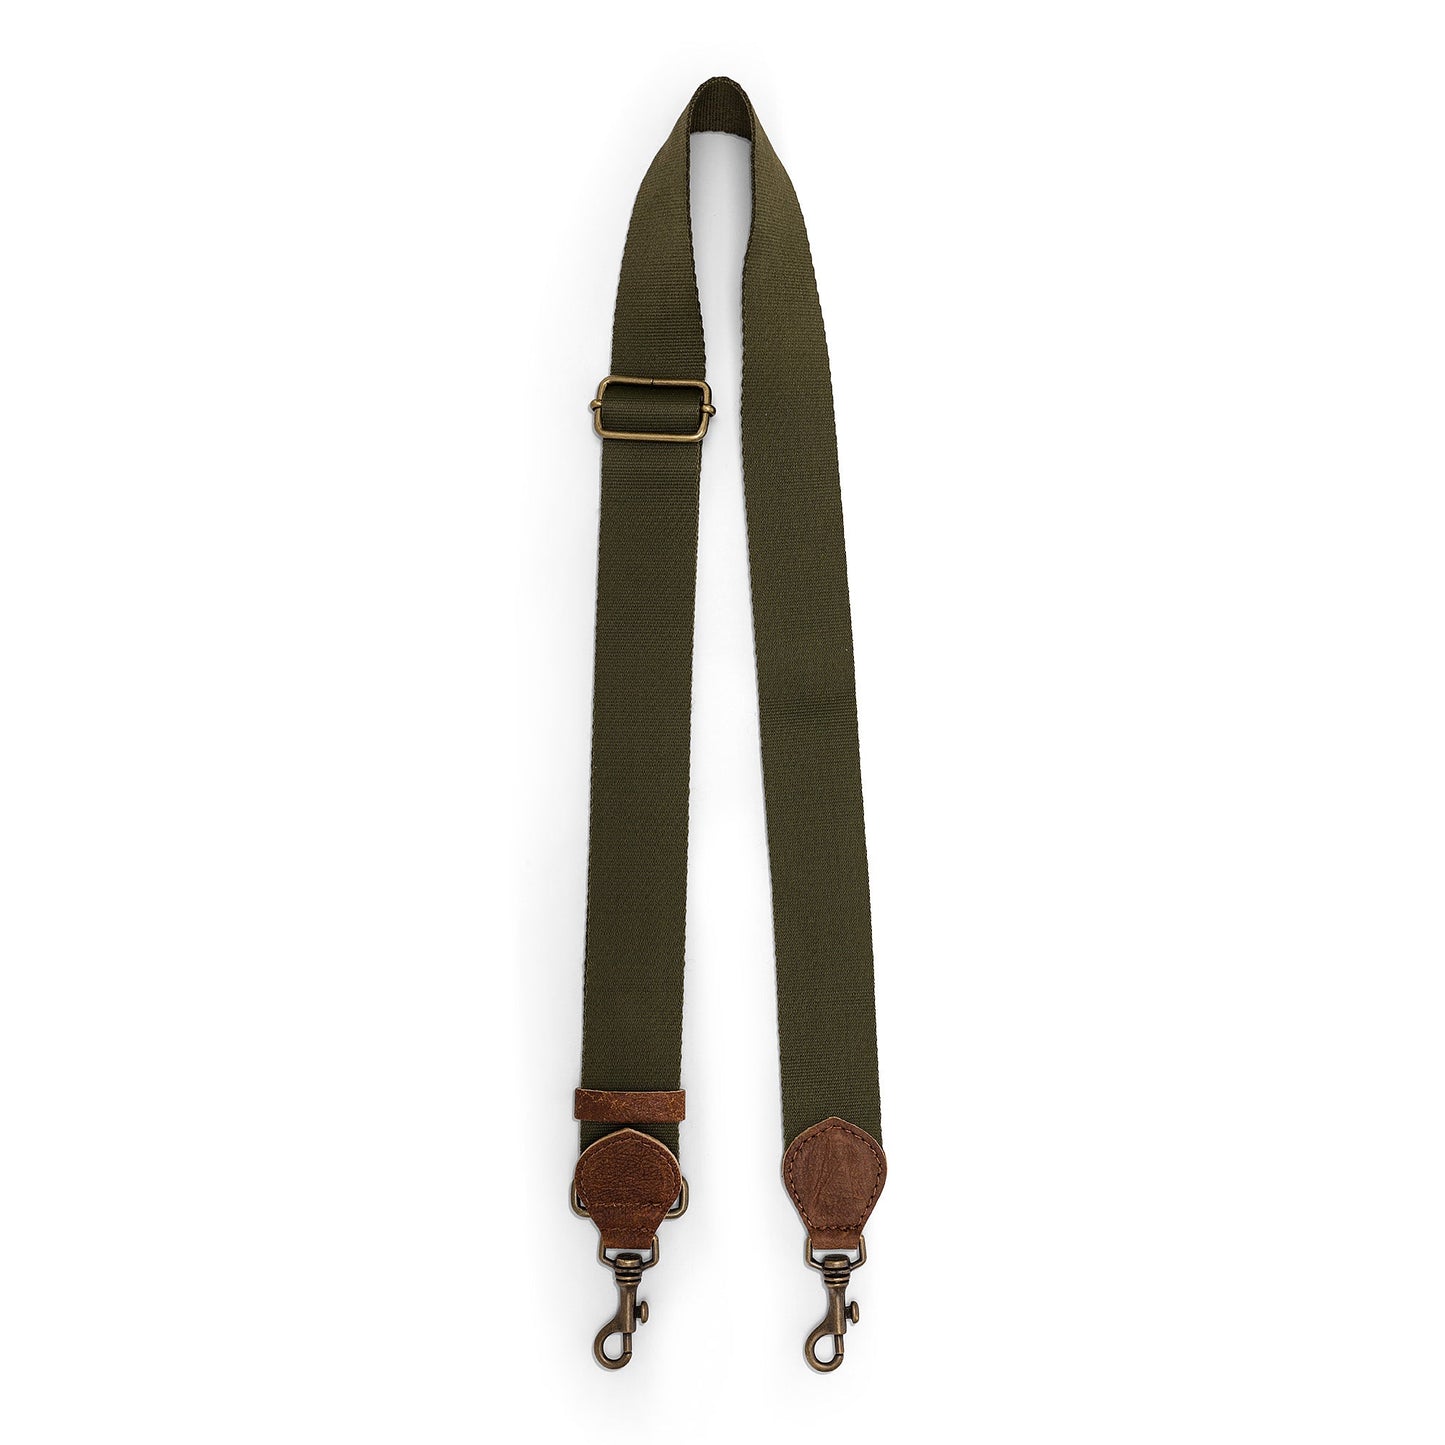 An olive bag strap is shown. The strap shows a brass adjuster, washable paper details and metal retractable fasteners.